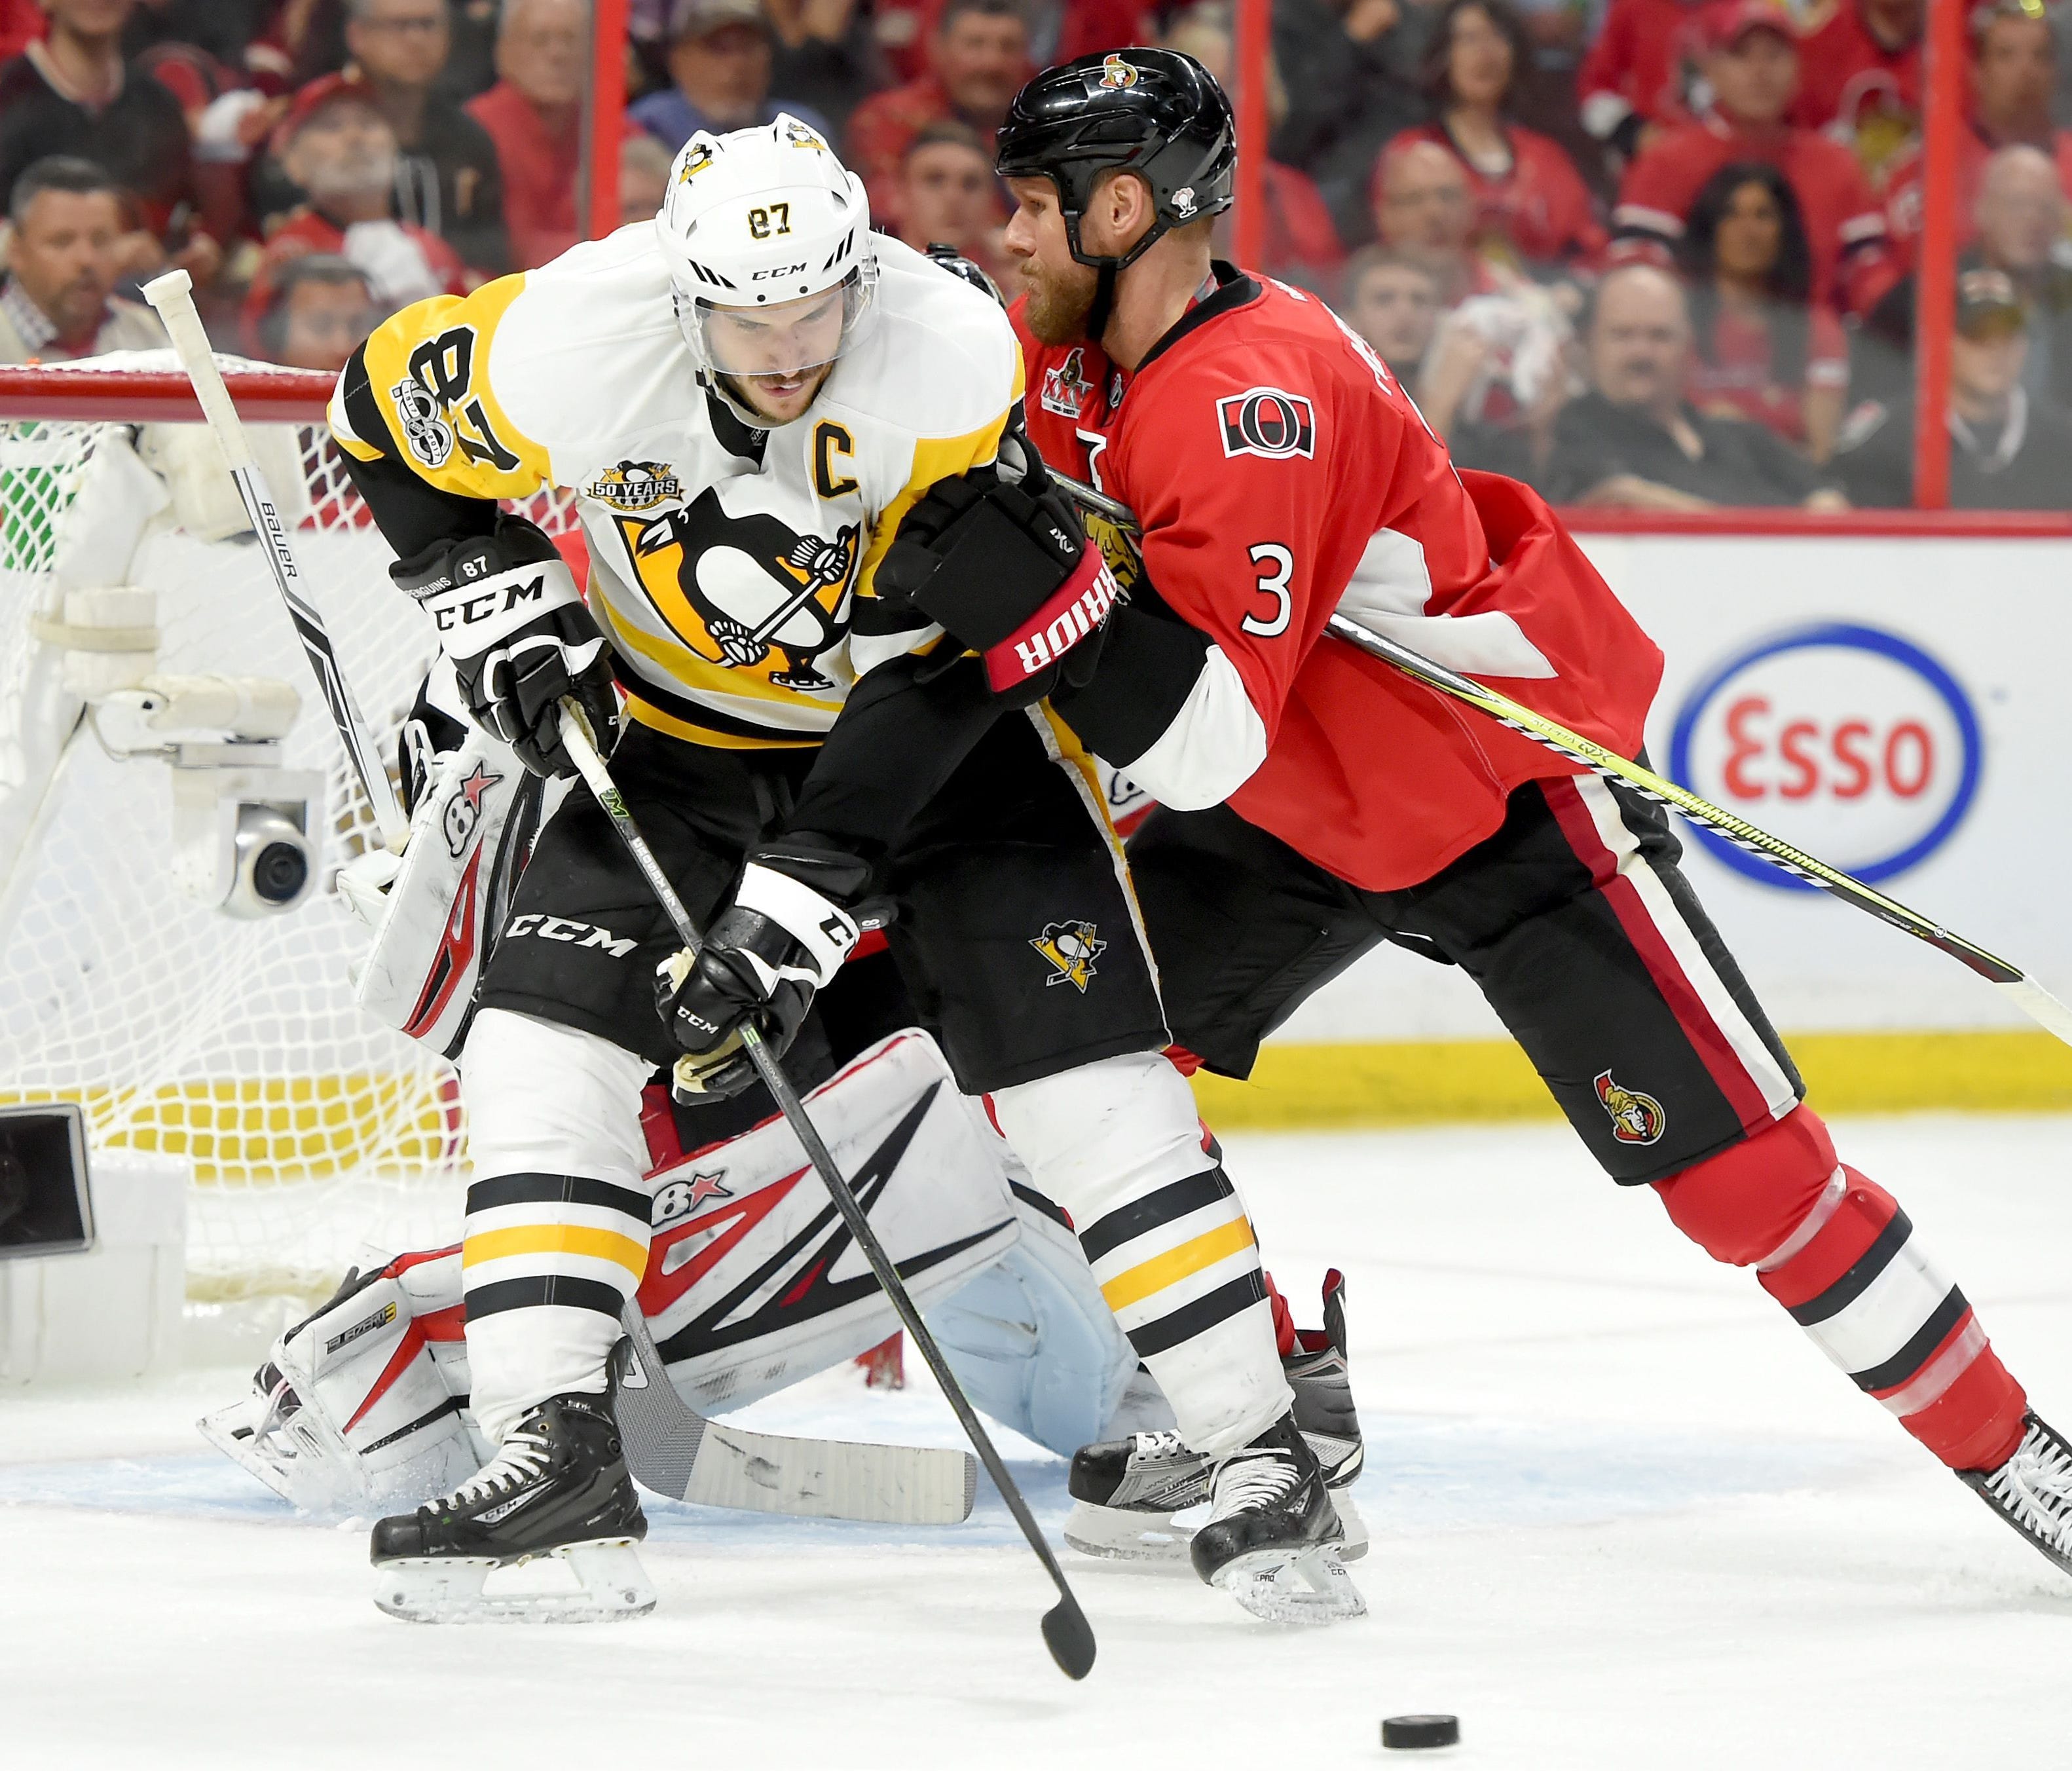 Pittsburgh Penguins forward Sidney Crosby (87) tries to control the puck as Ottawa Senators defencemen Marc Methot (3) attempts to push him aside in Game 6 of the Eastern Conference final.